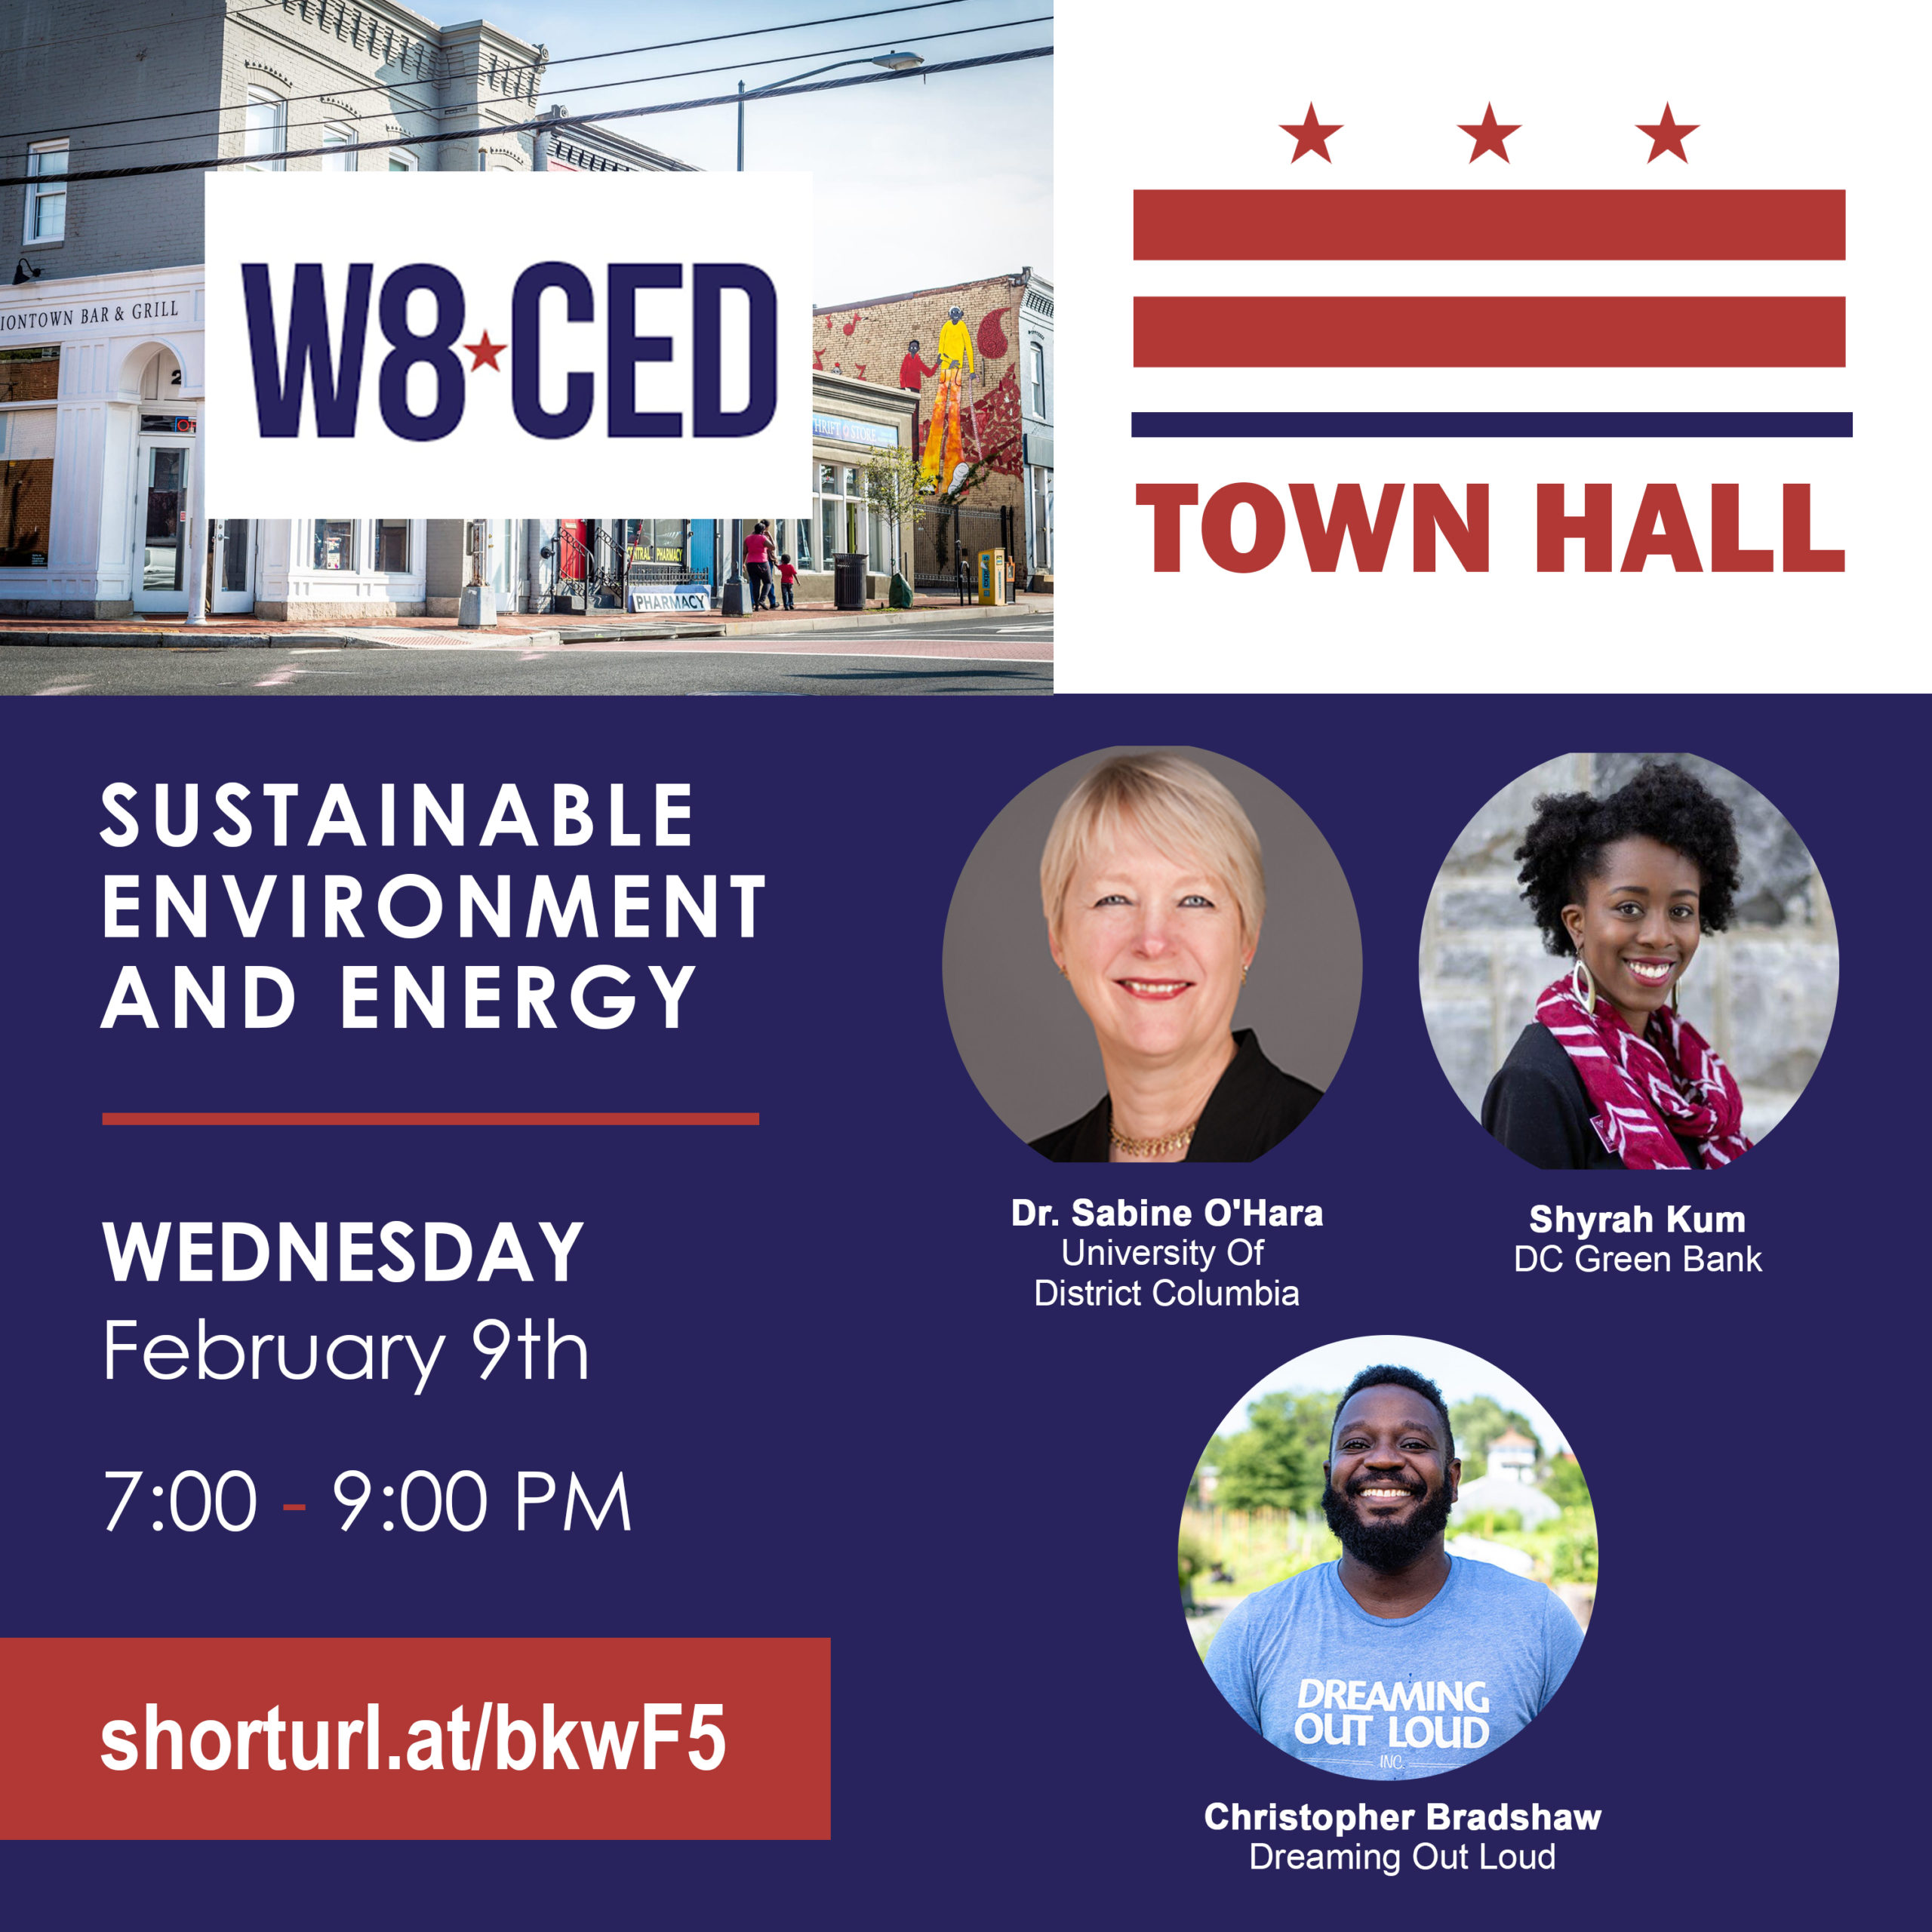 W8CED Town Hall – Sustainable Environment and Energy